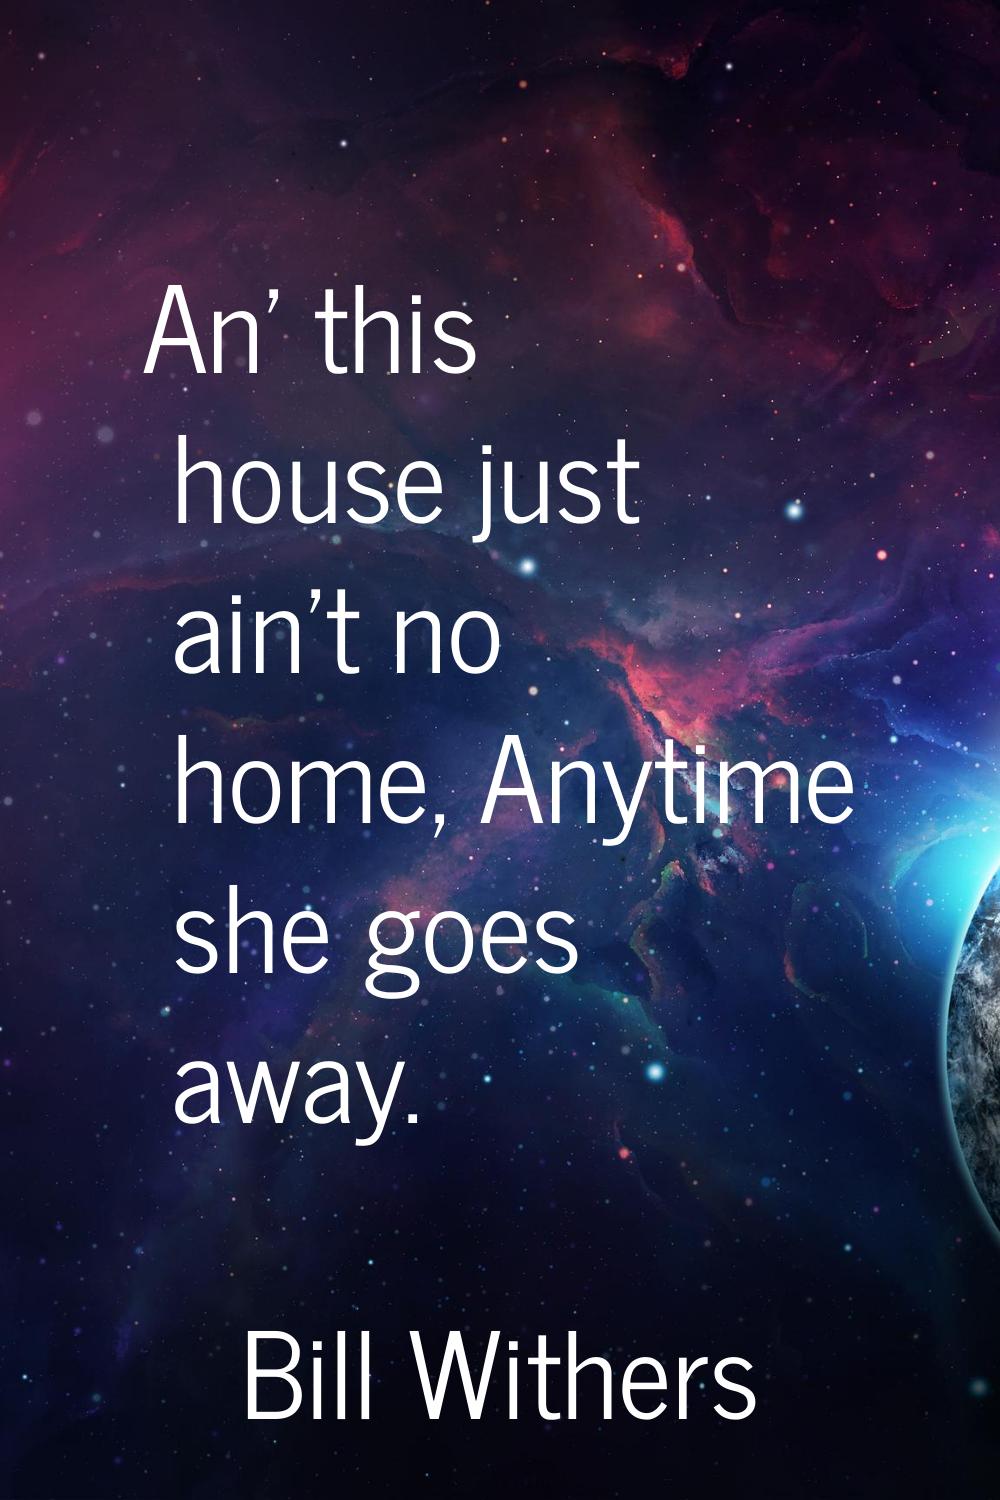 An' this house just ain't no home, Anytime she goes away.